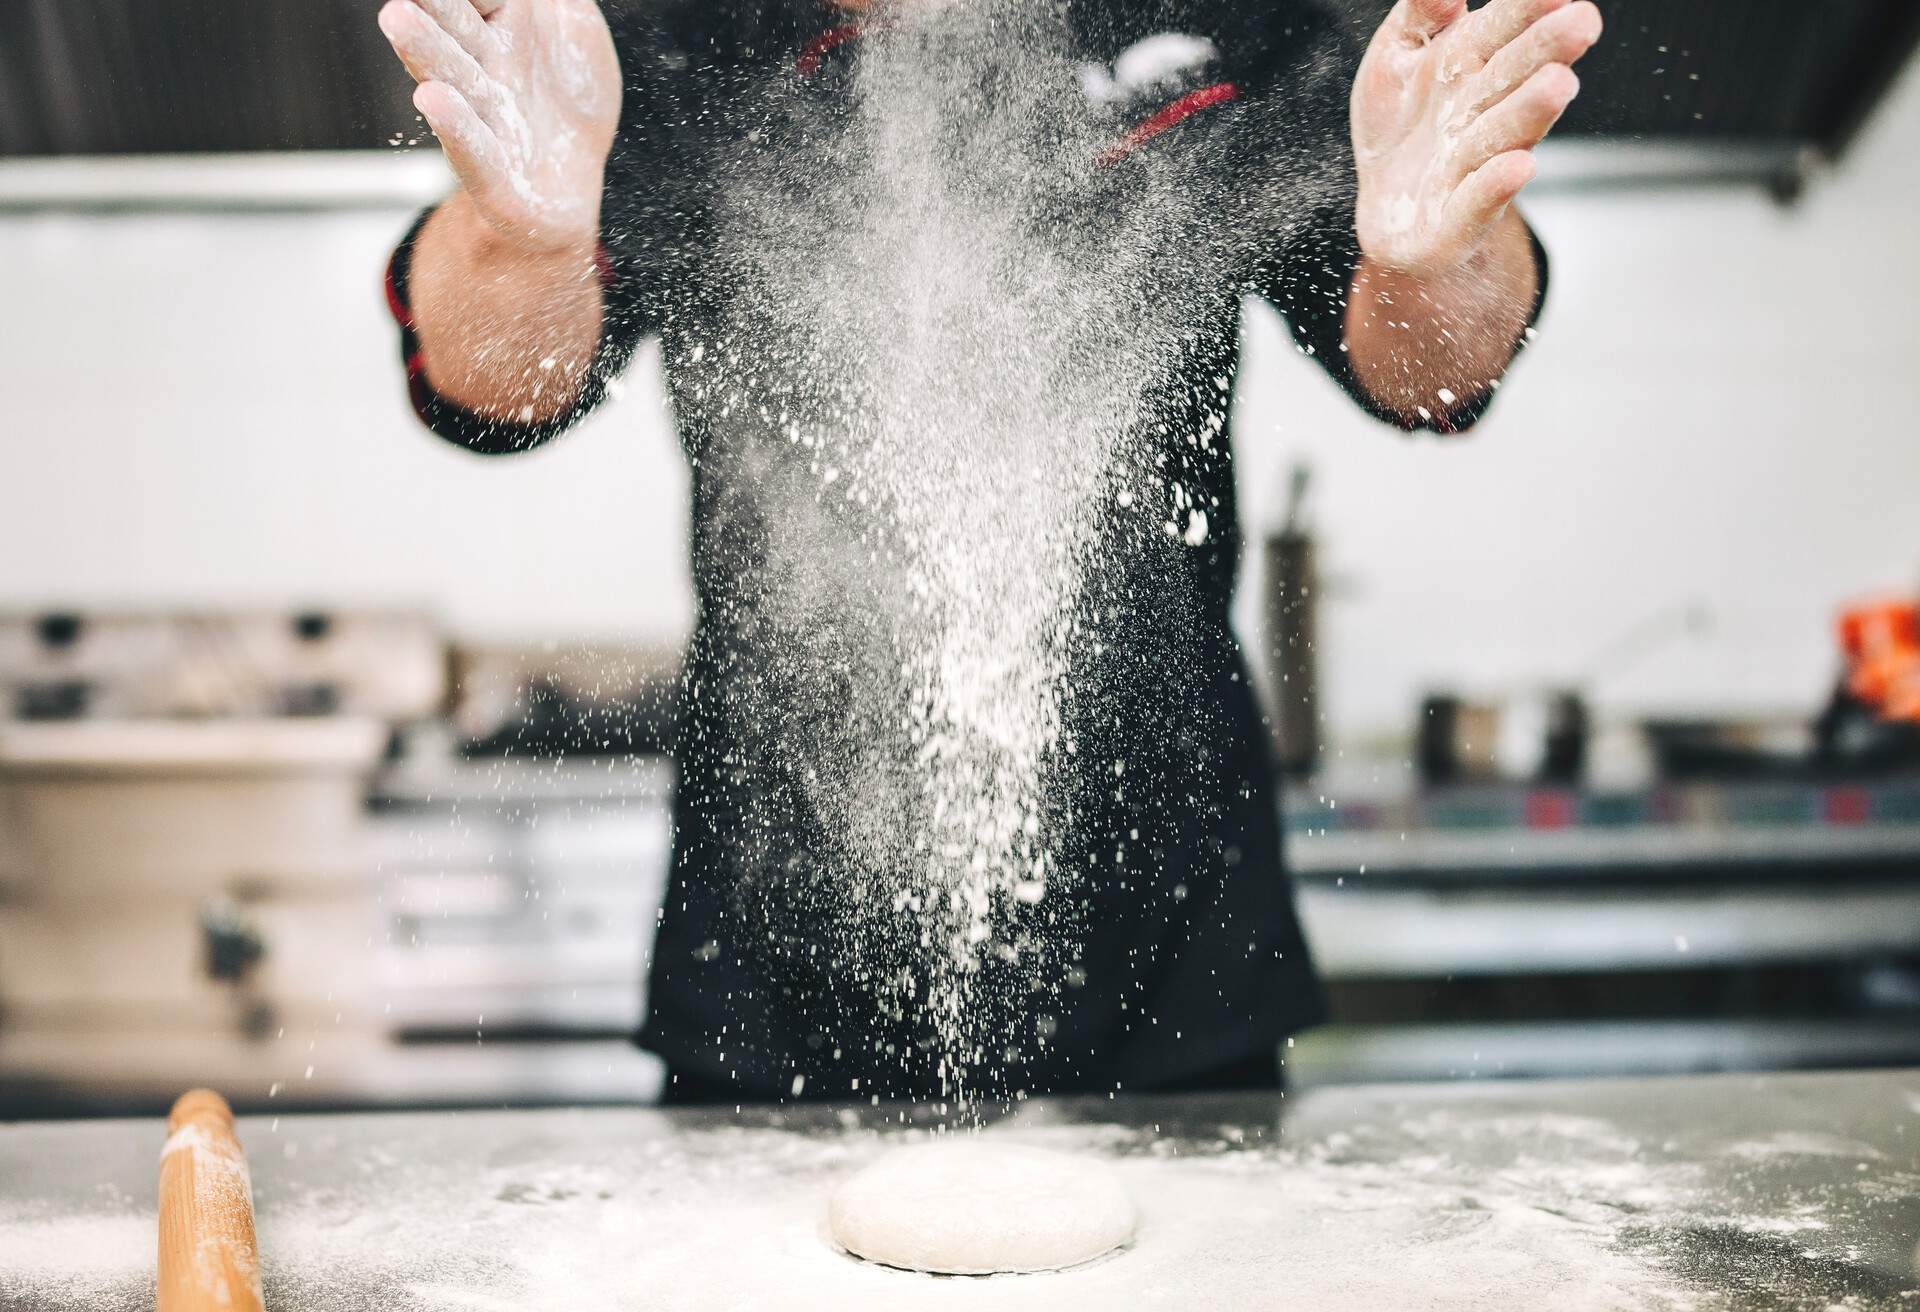 Chef baker preparing a pizza in the italian restaurant. He use fresh products, and throwing flour in the air